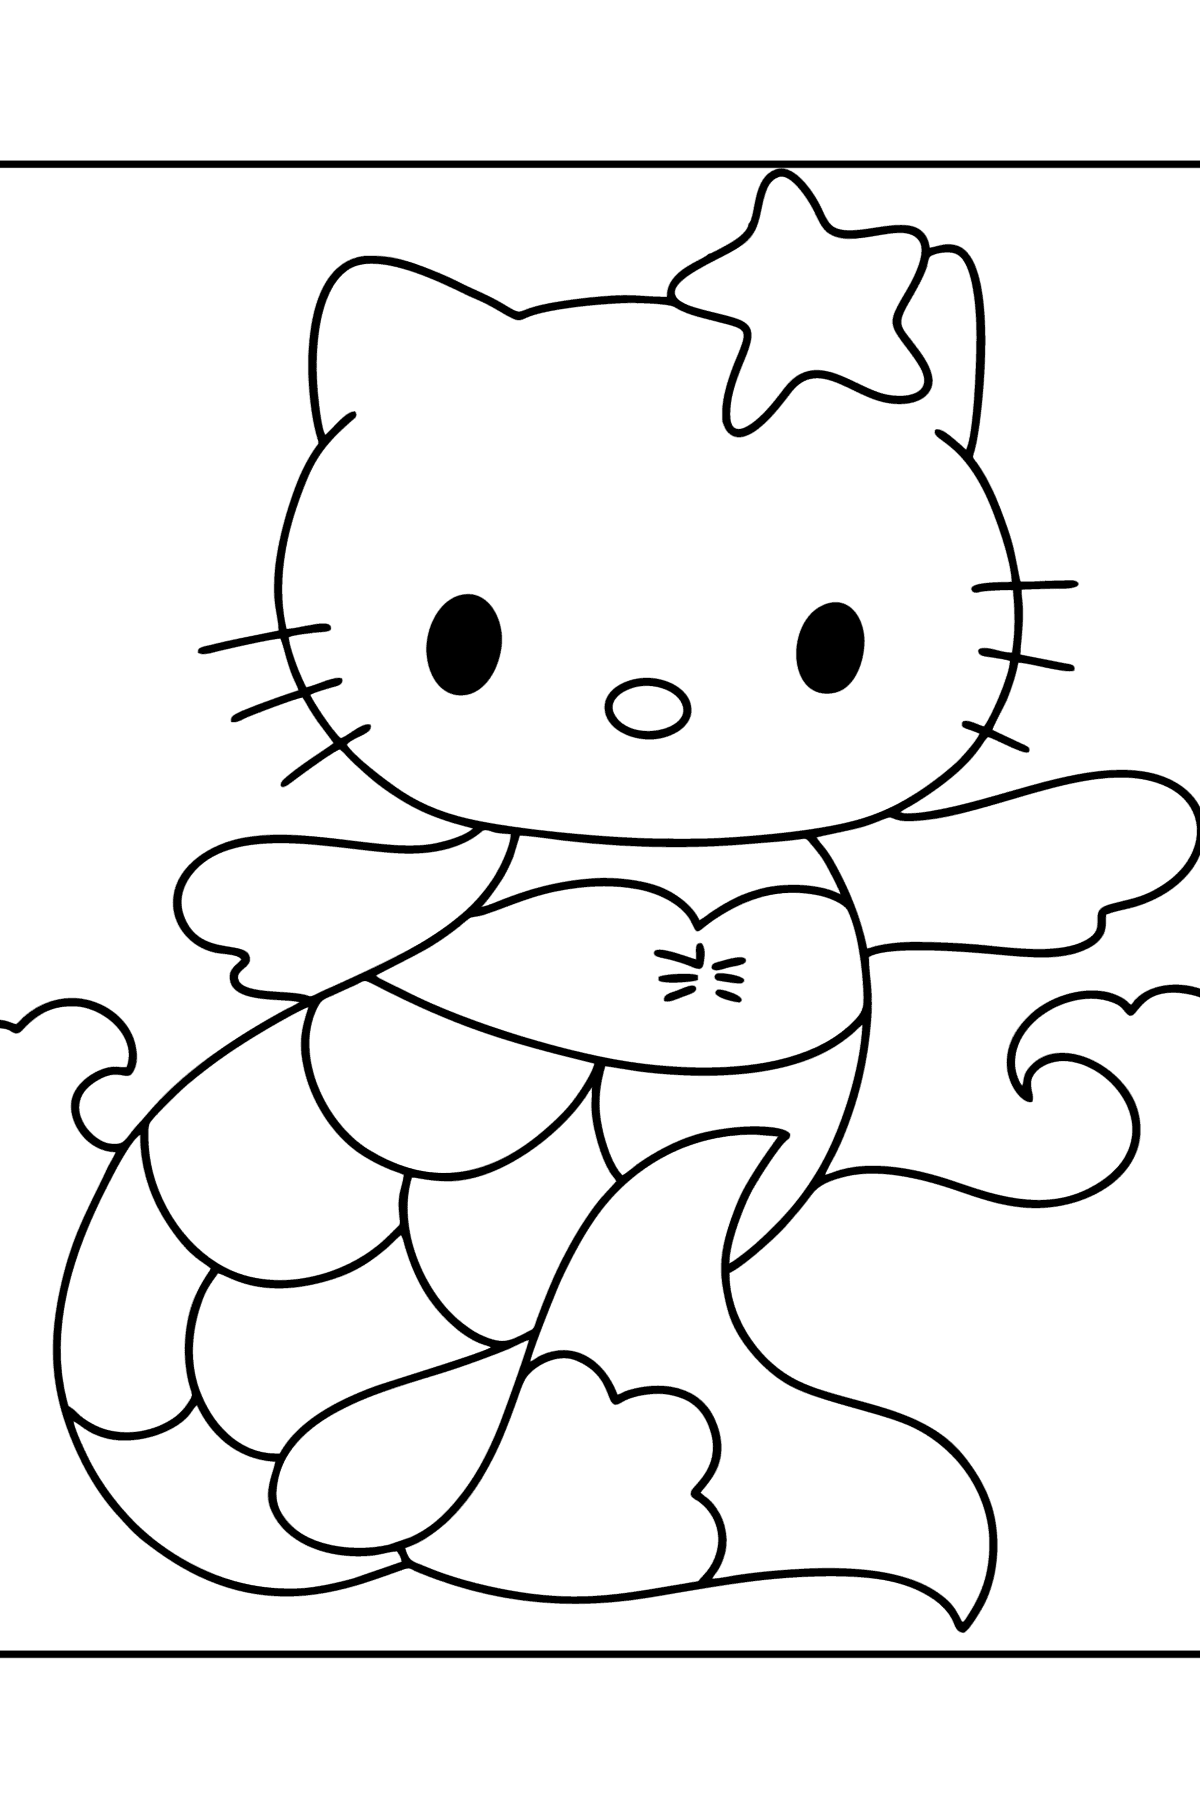 Hello Kitty Mermaid coloring page - Coloring Pages for Kids